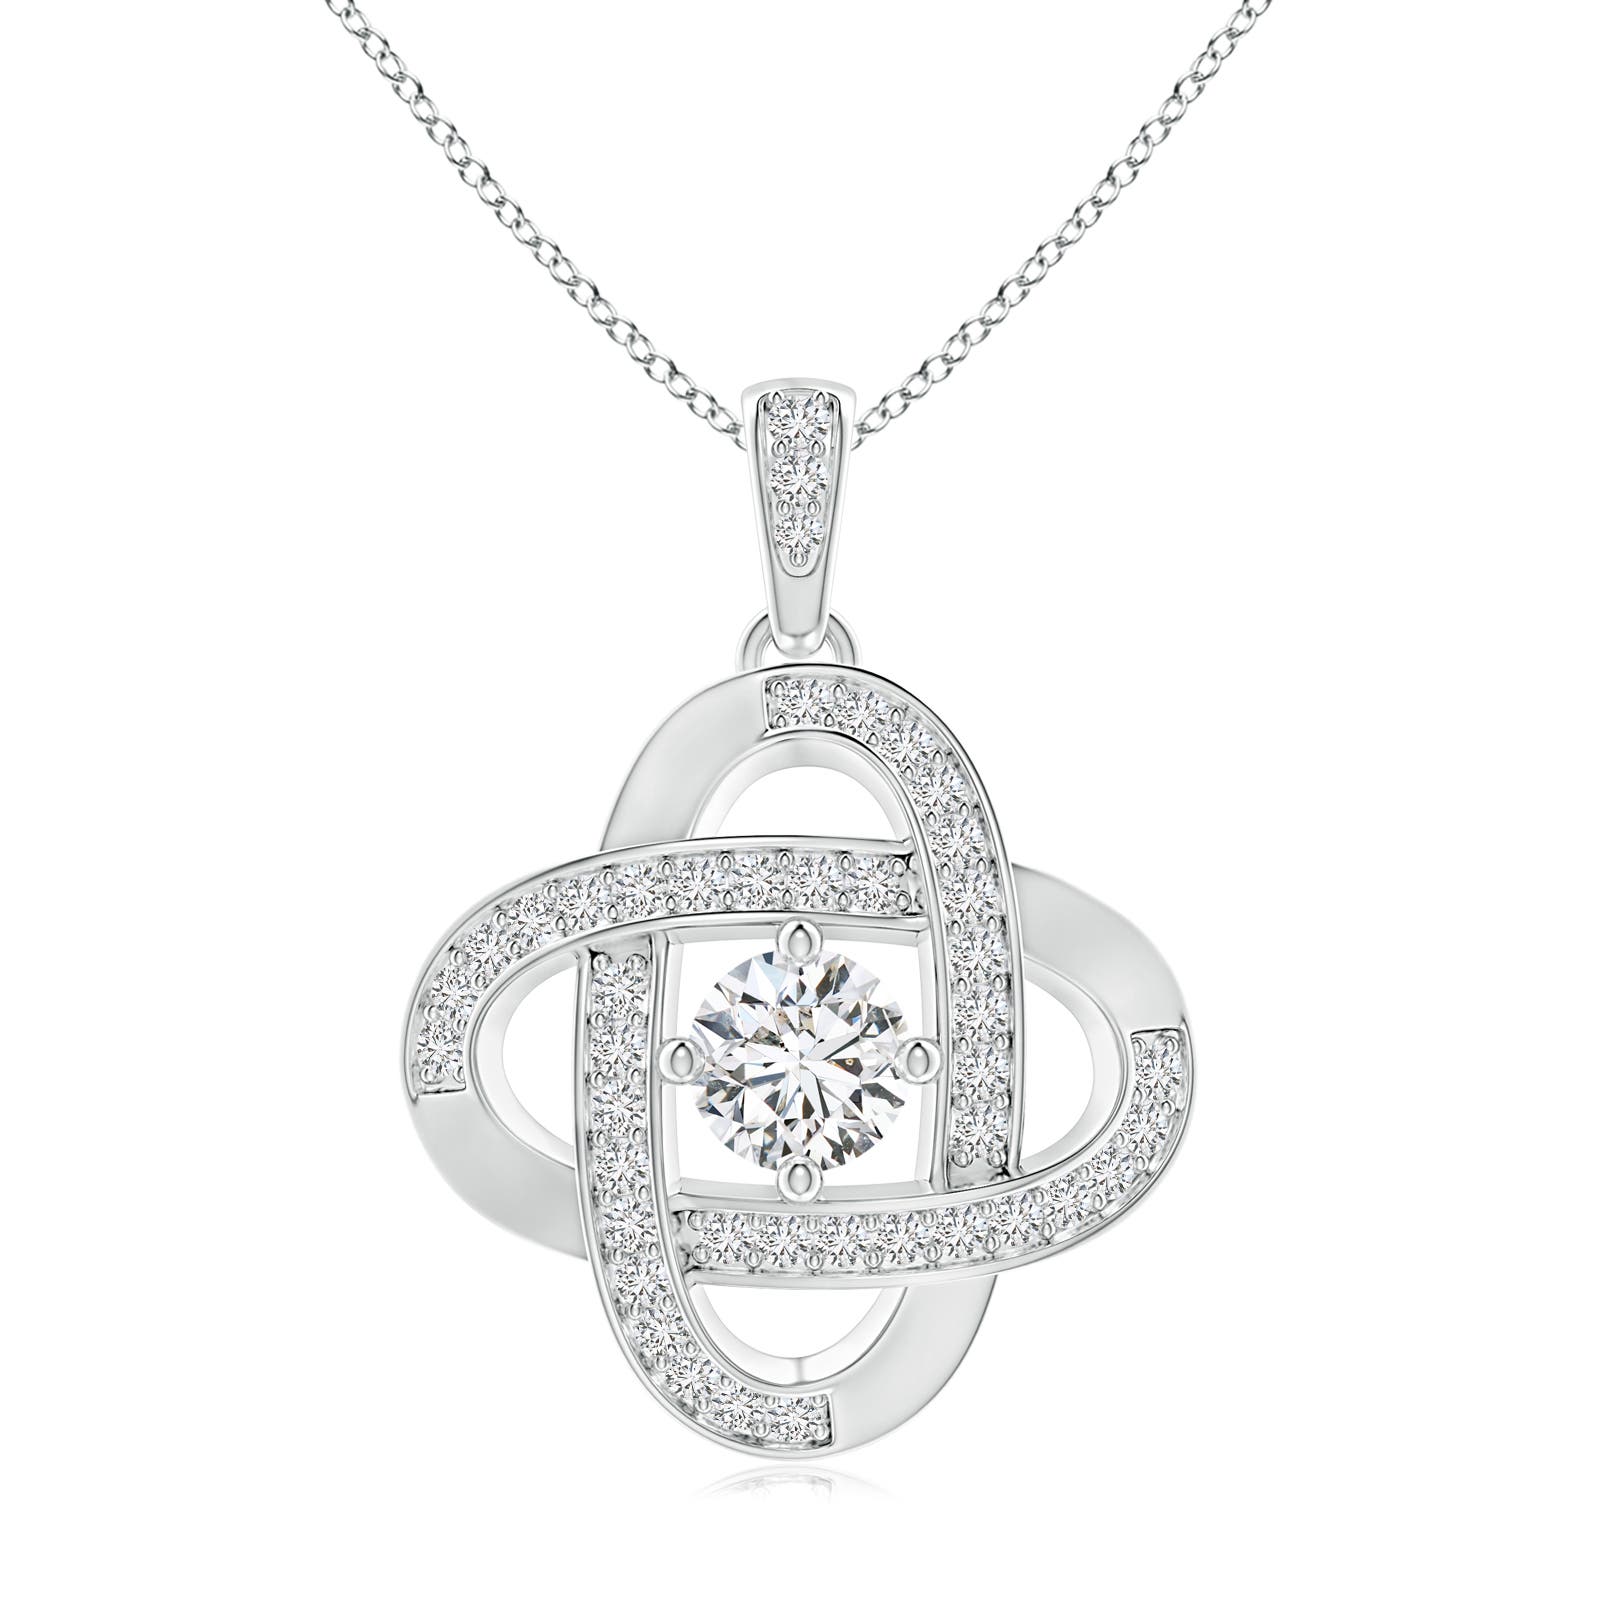 14k White Gold Trinity Knot Pendant With Diamonds And Emeralds